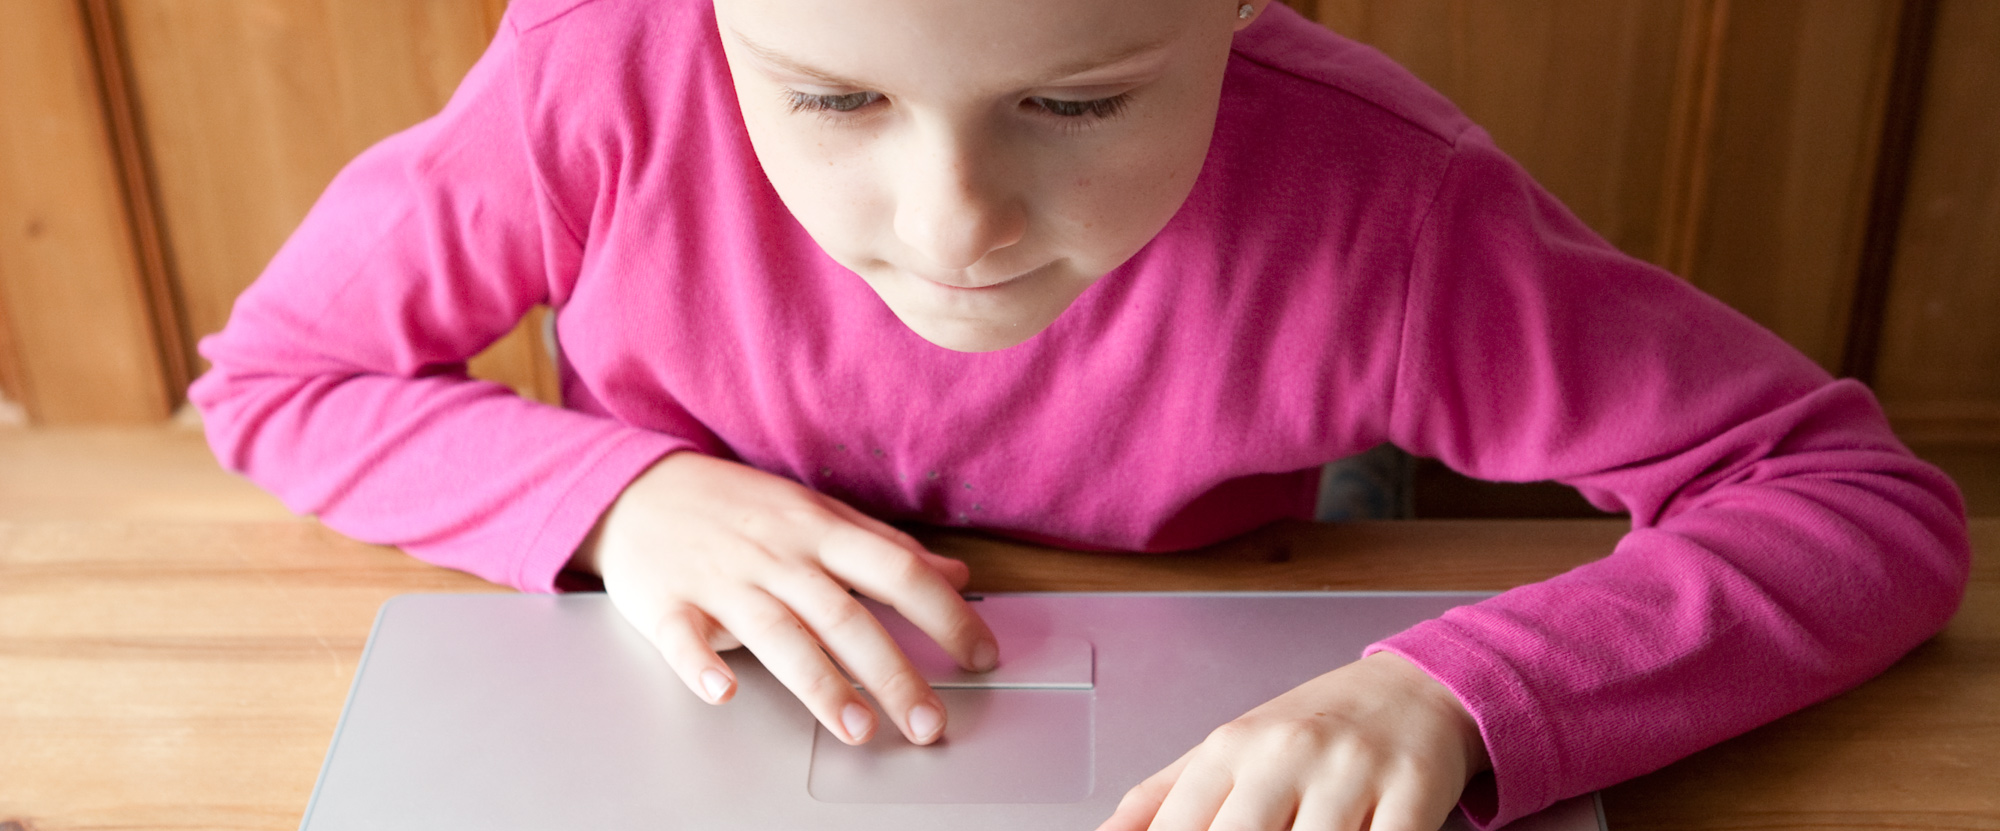 A child wearing a pink top is using a laptop, they are concentrating.